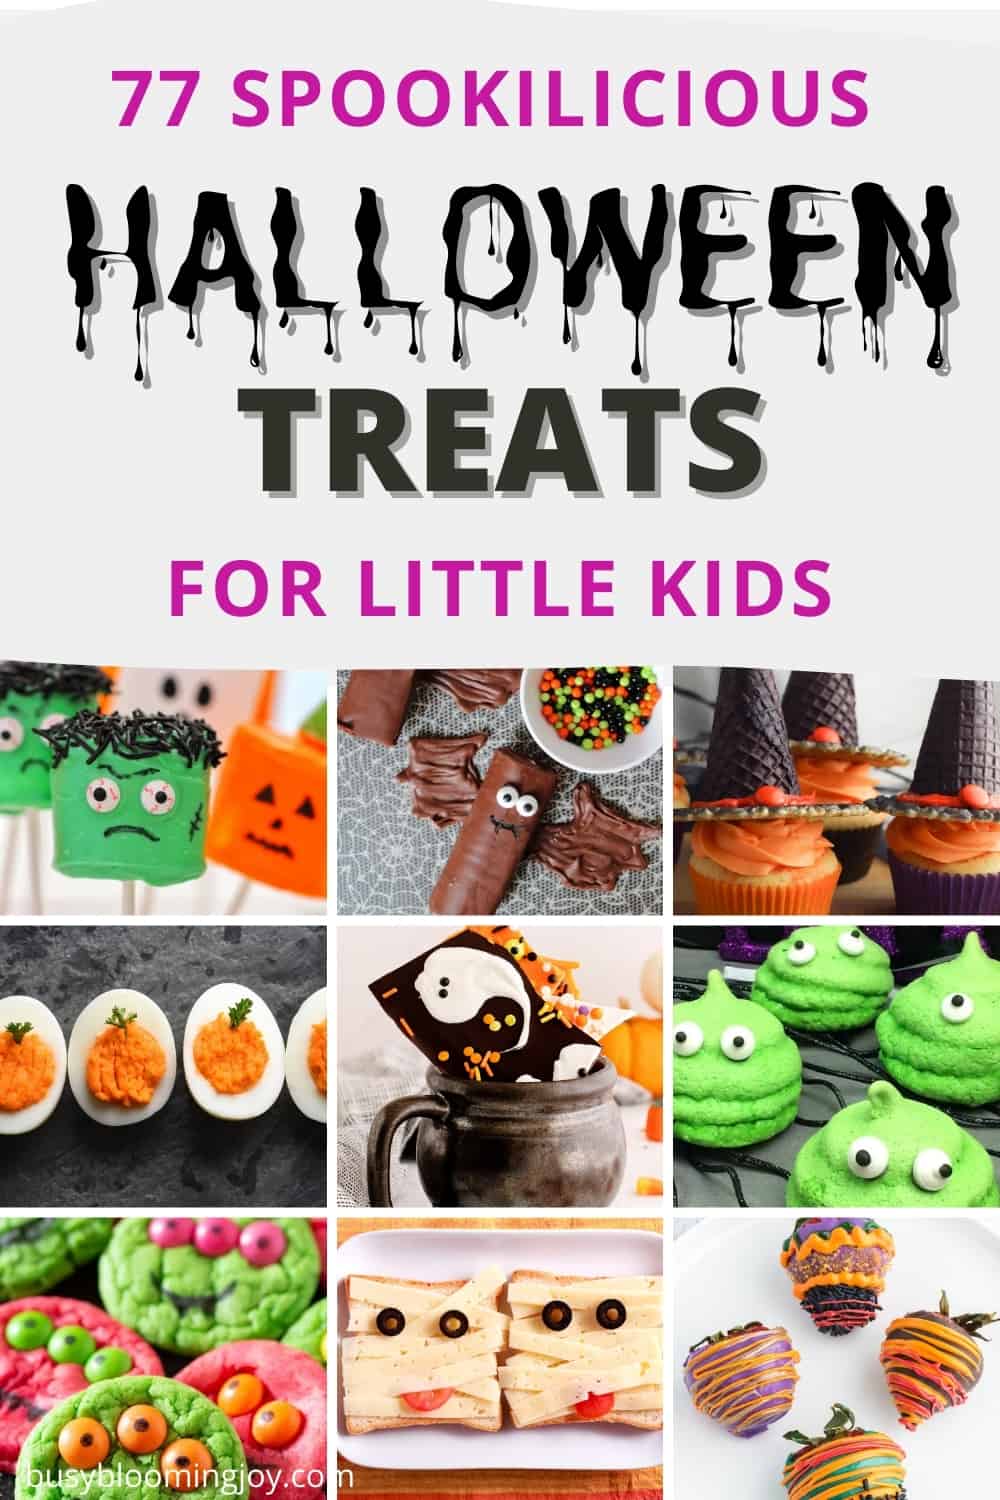 77 Spookylicious Halloween treats for toddlers